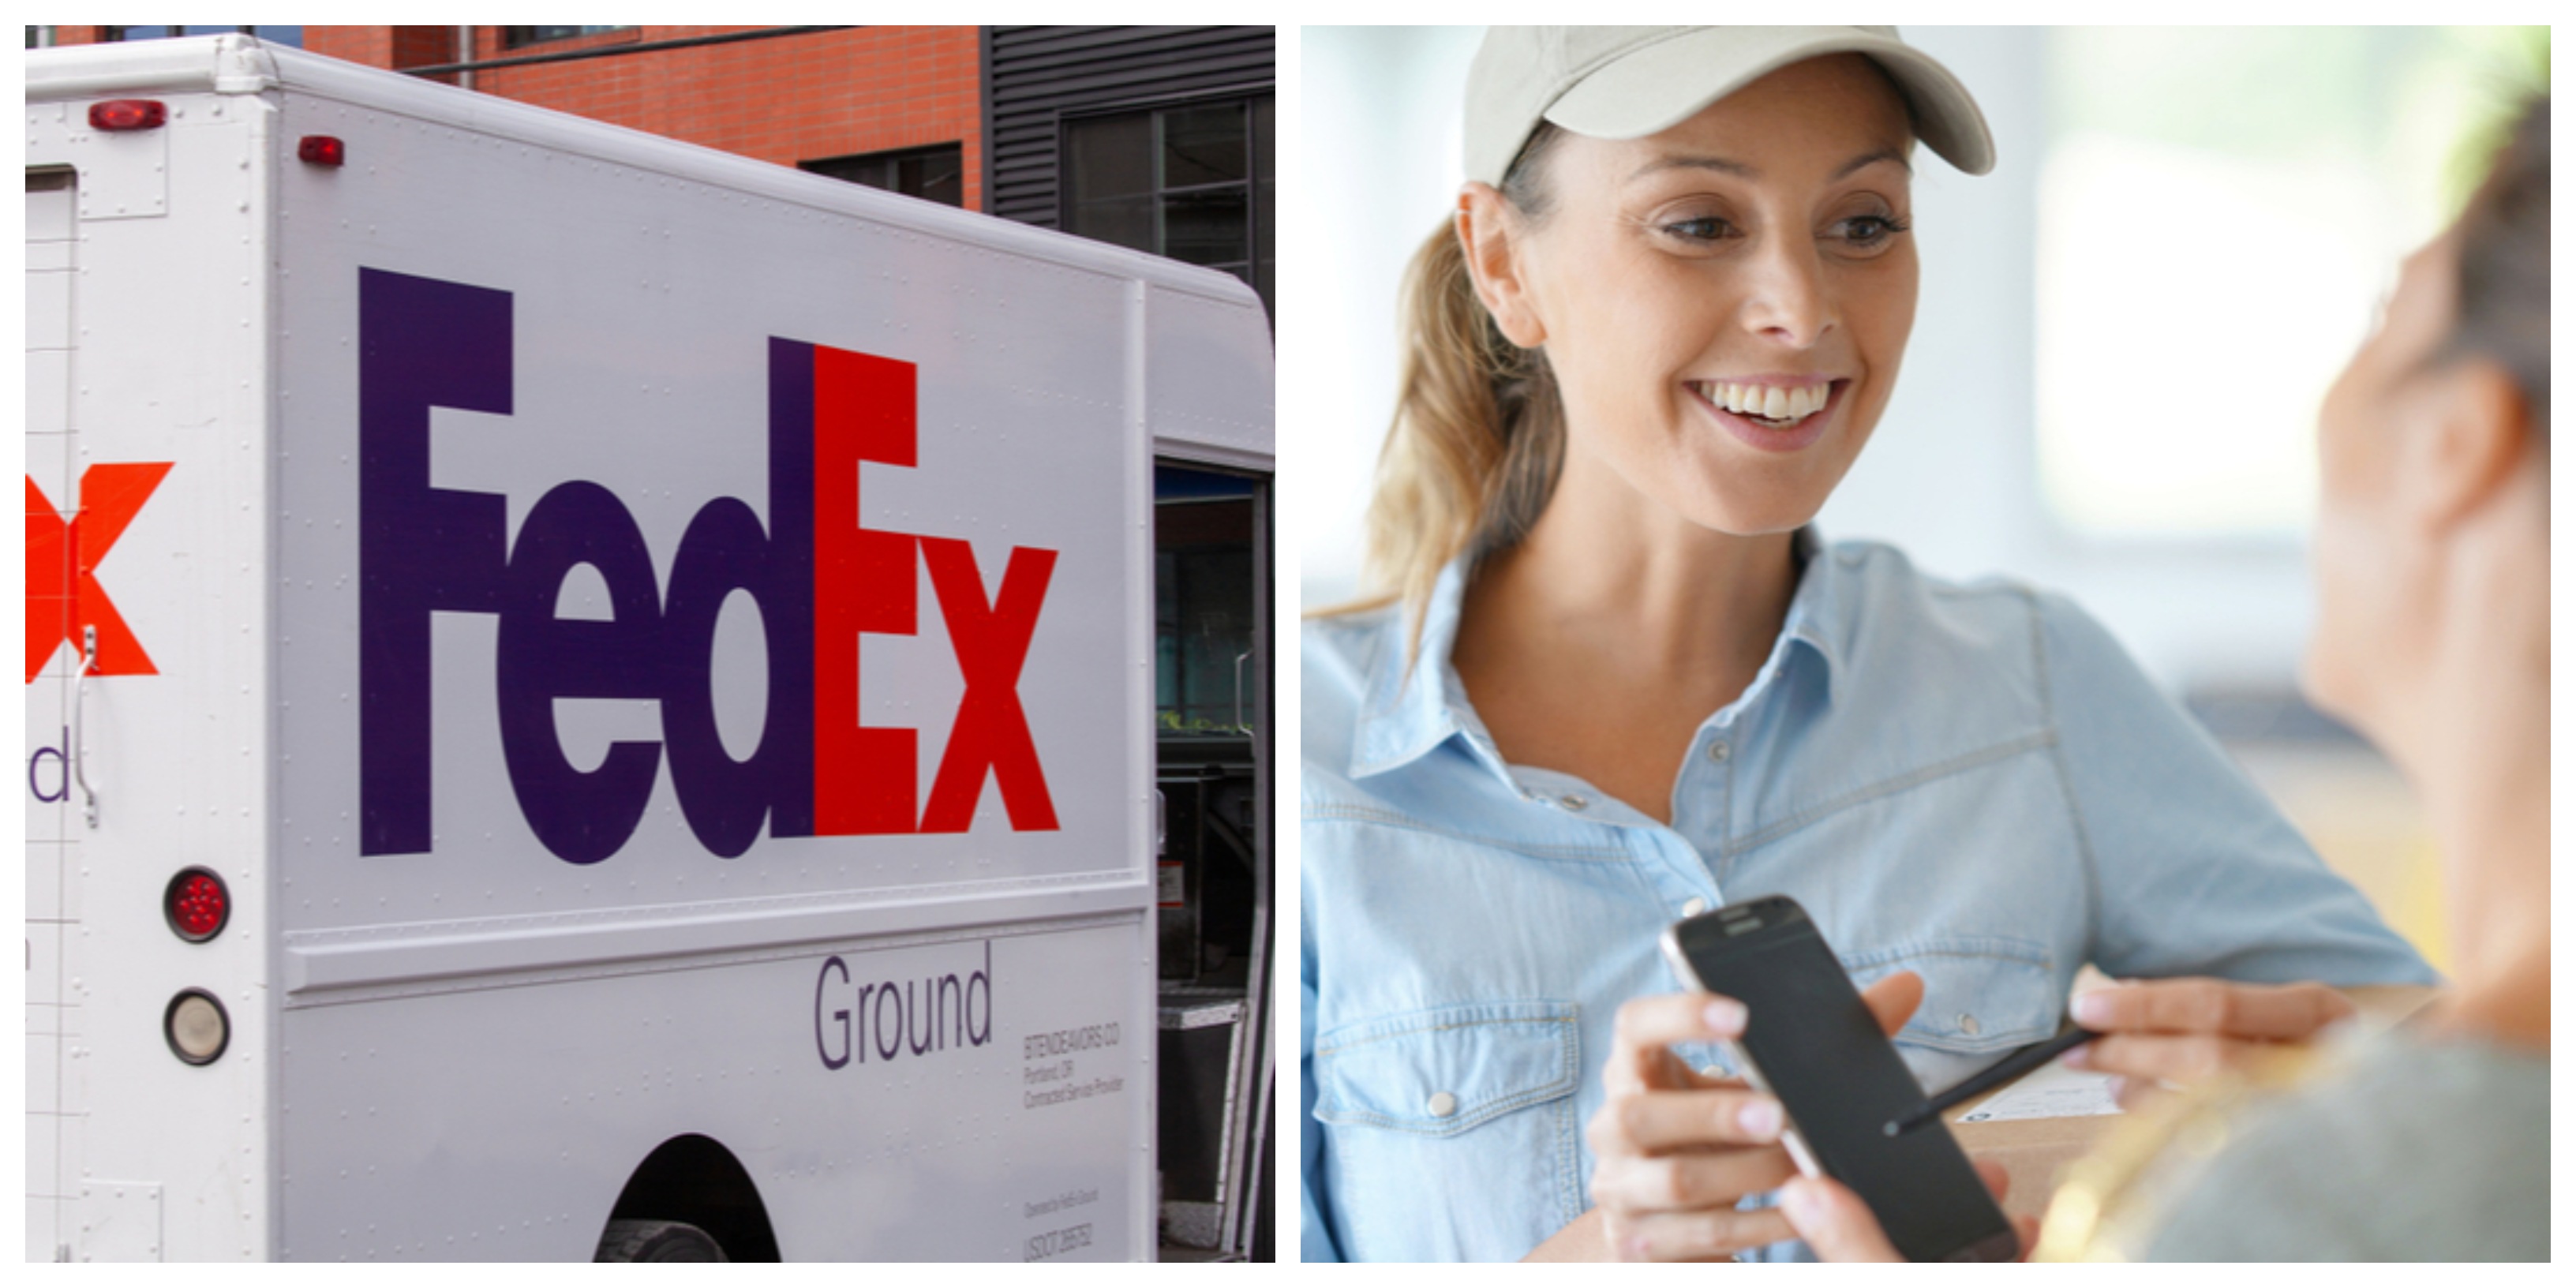 fed ex truck delivery girl customer signs